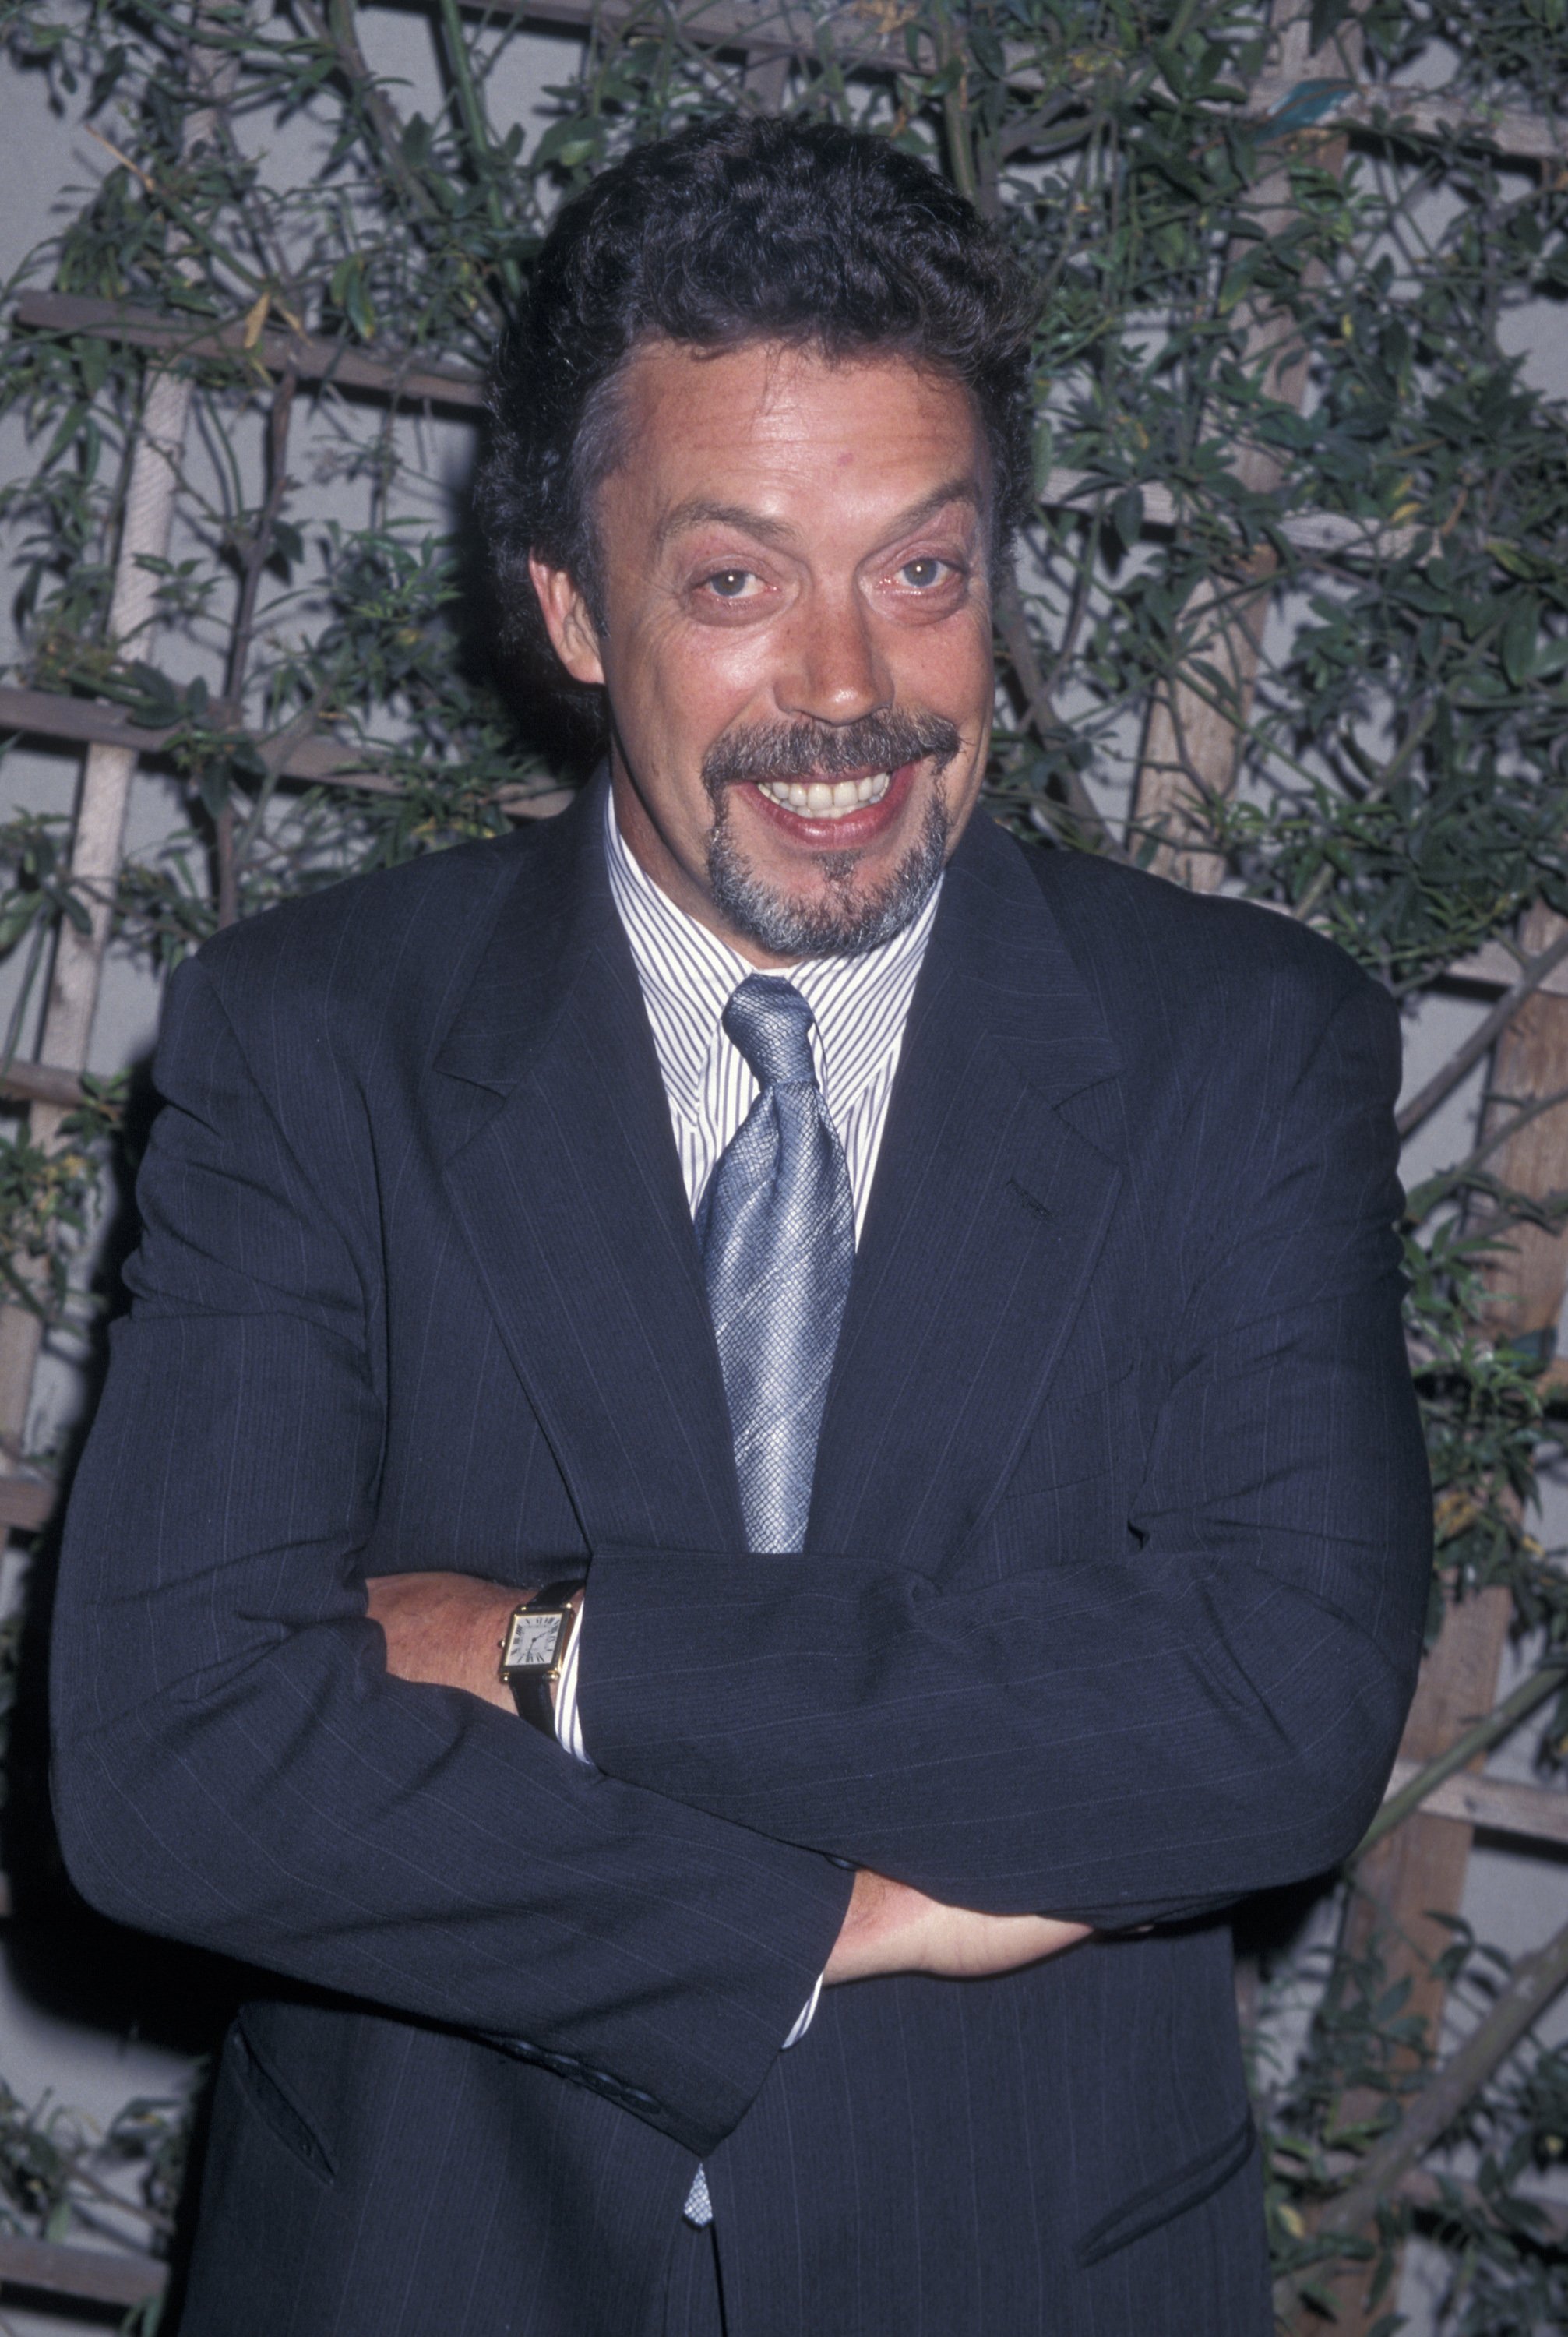 Tim Curry at the Ritz Carlton Hotel in Pasadena, California | Source: Getty Images